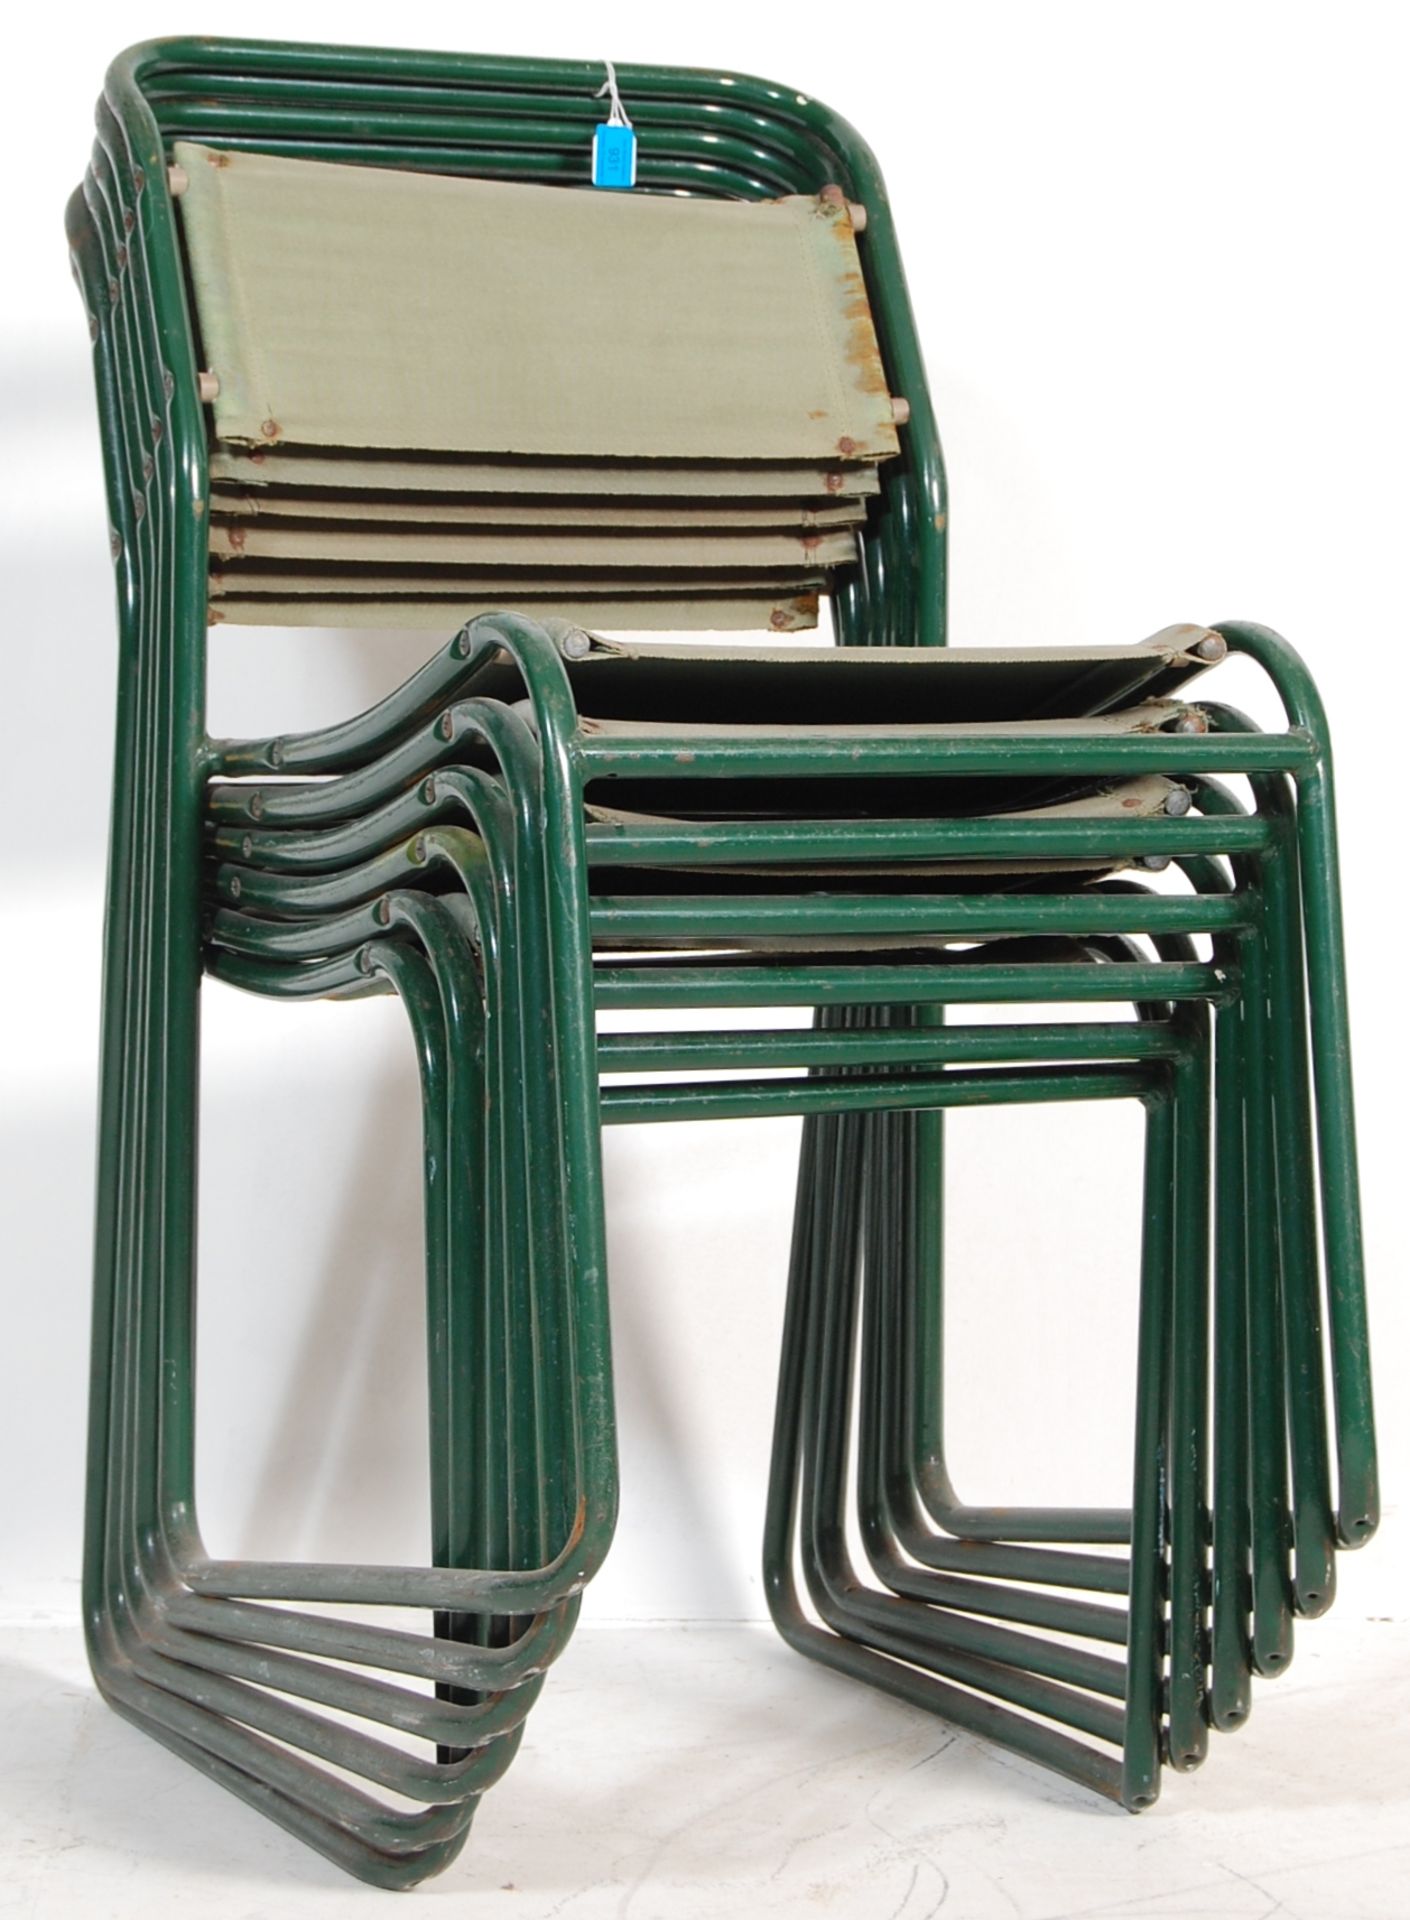 GROUP OF SIX 20TH CENTURY VINTAGE INDUSTRIAL RETRO VINTAGE TUBULAR FRAMED CHAIRS - Image 3 of 5